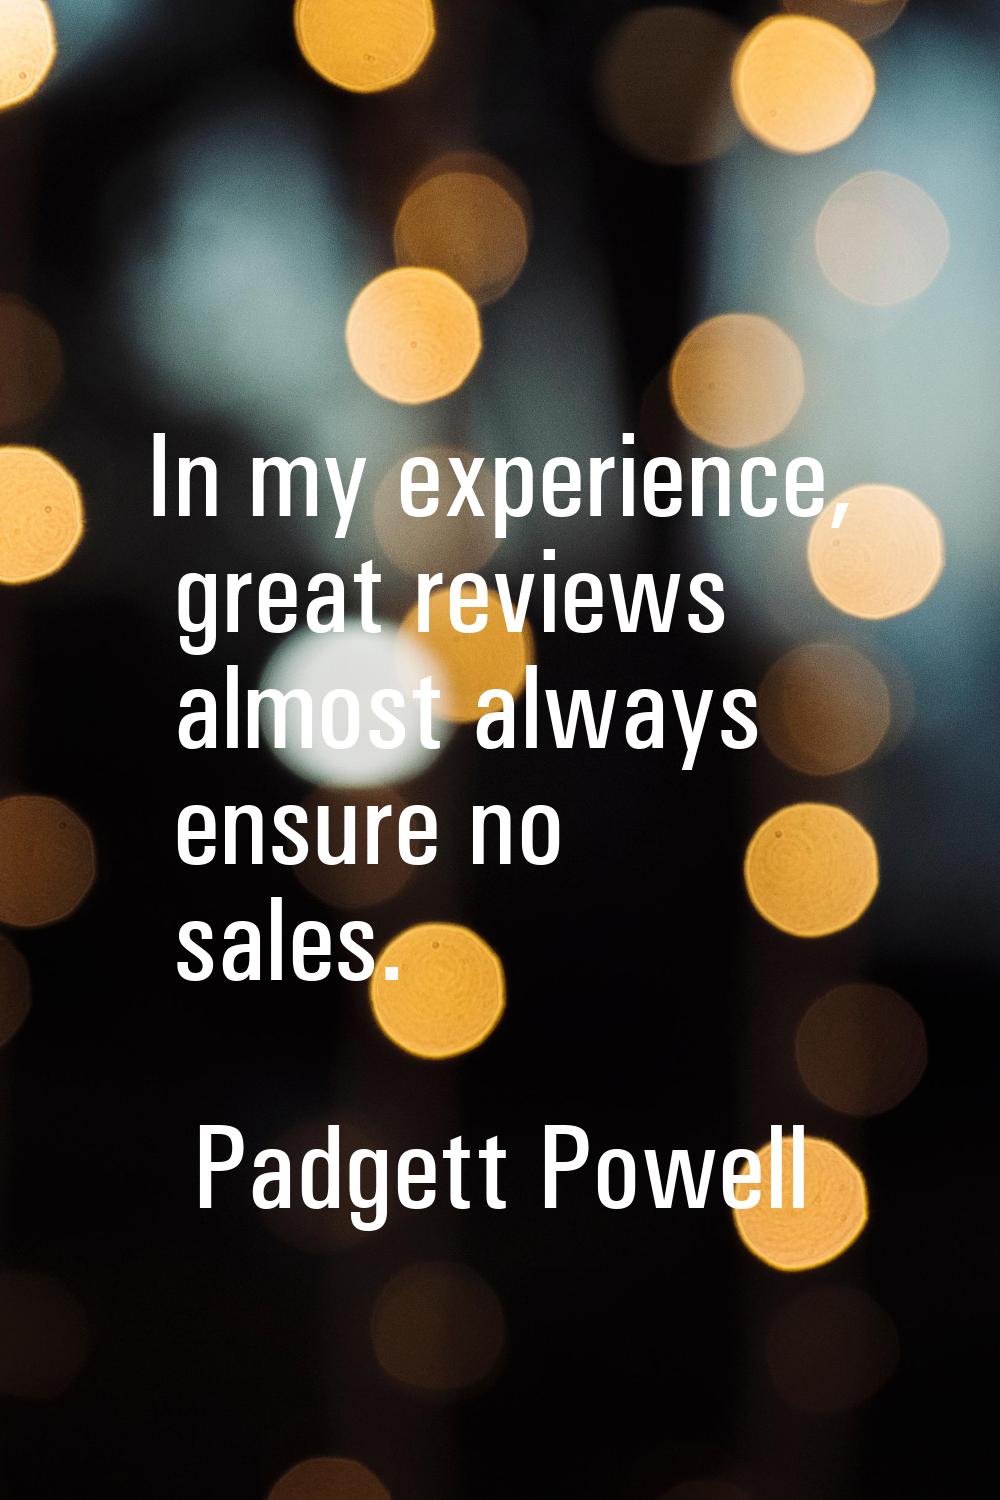 In my experience, great reviews almost always ensure no sales.